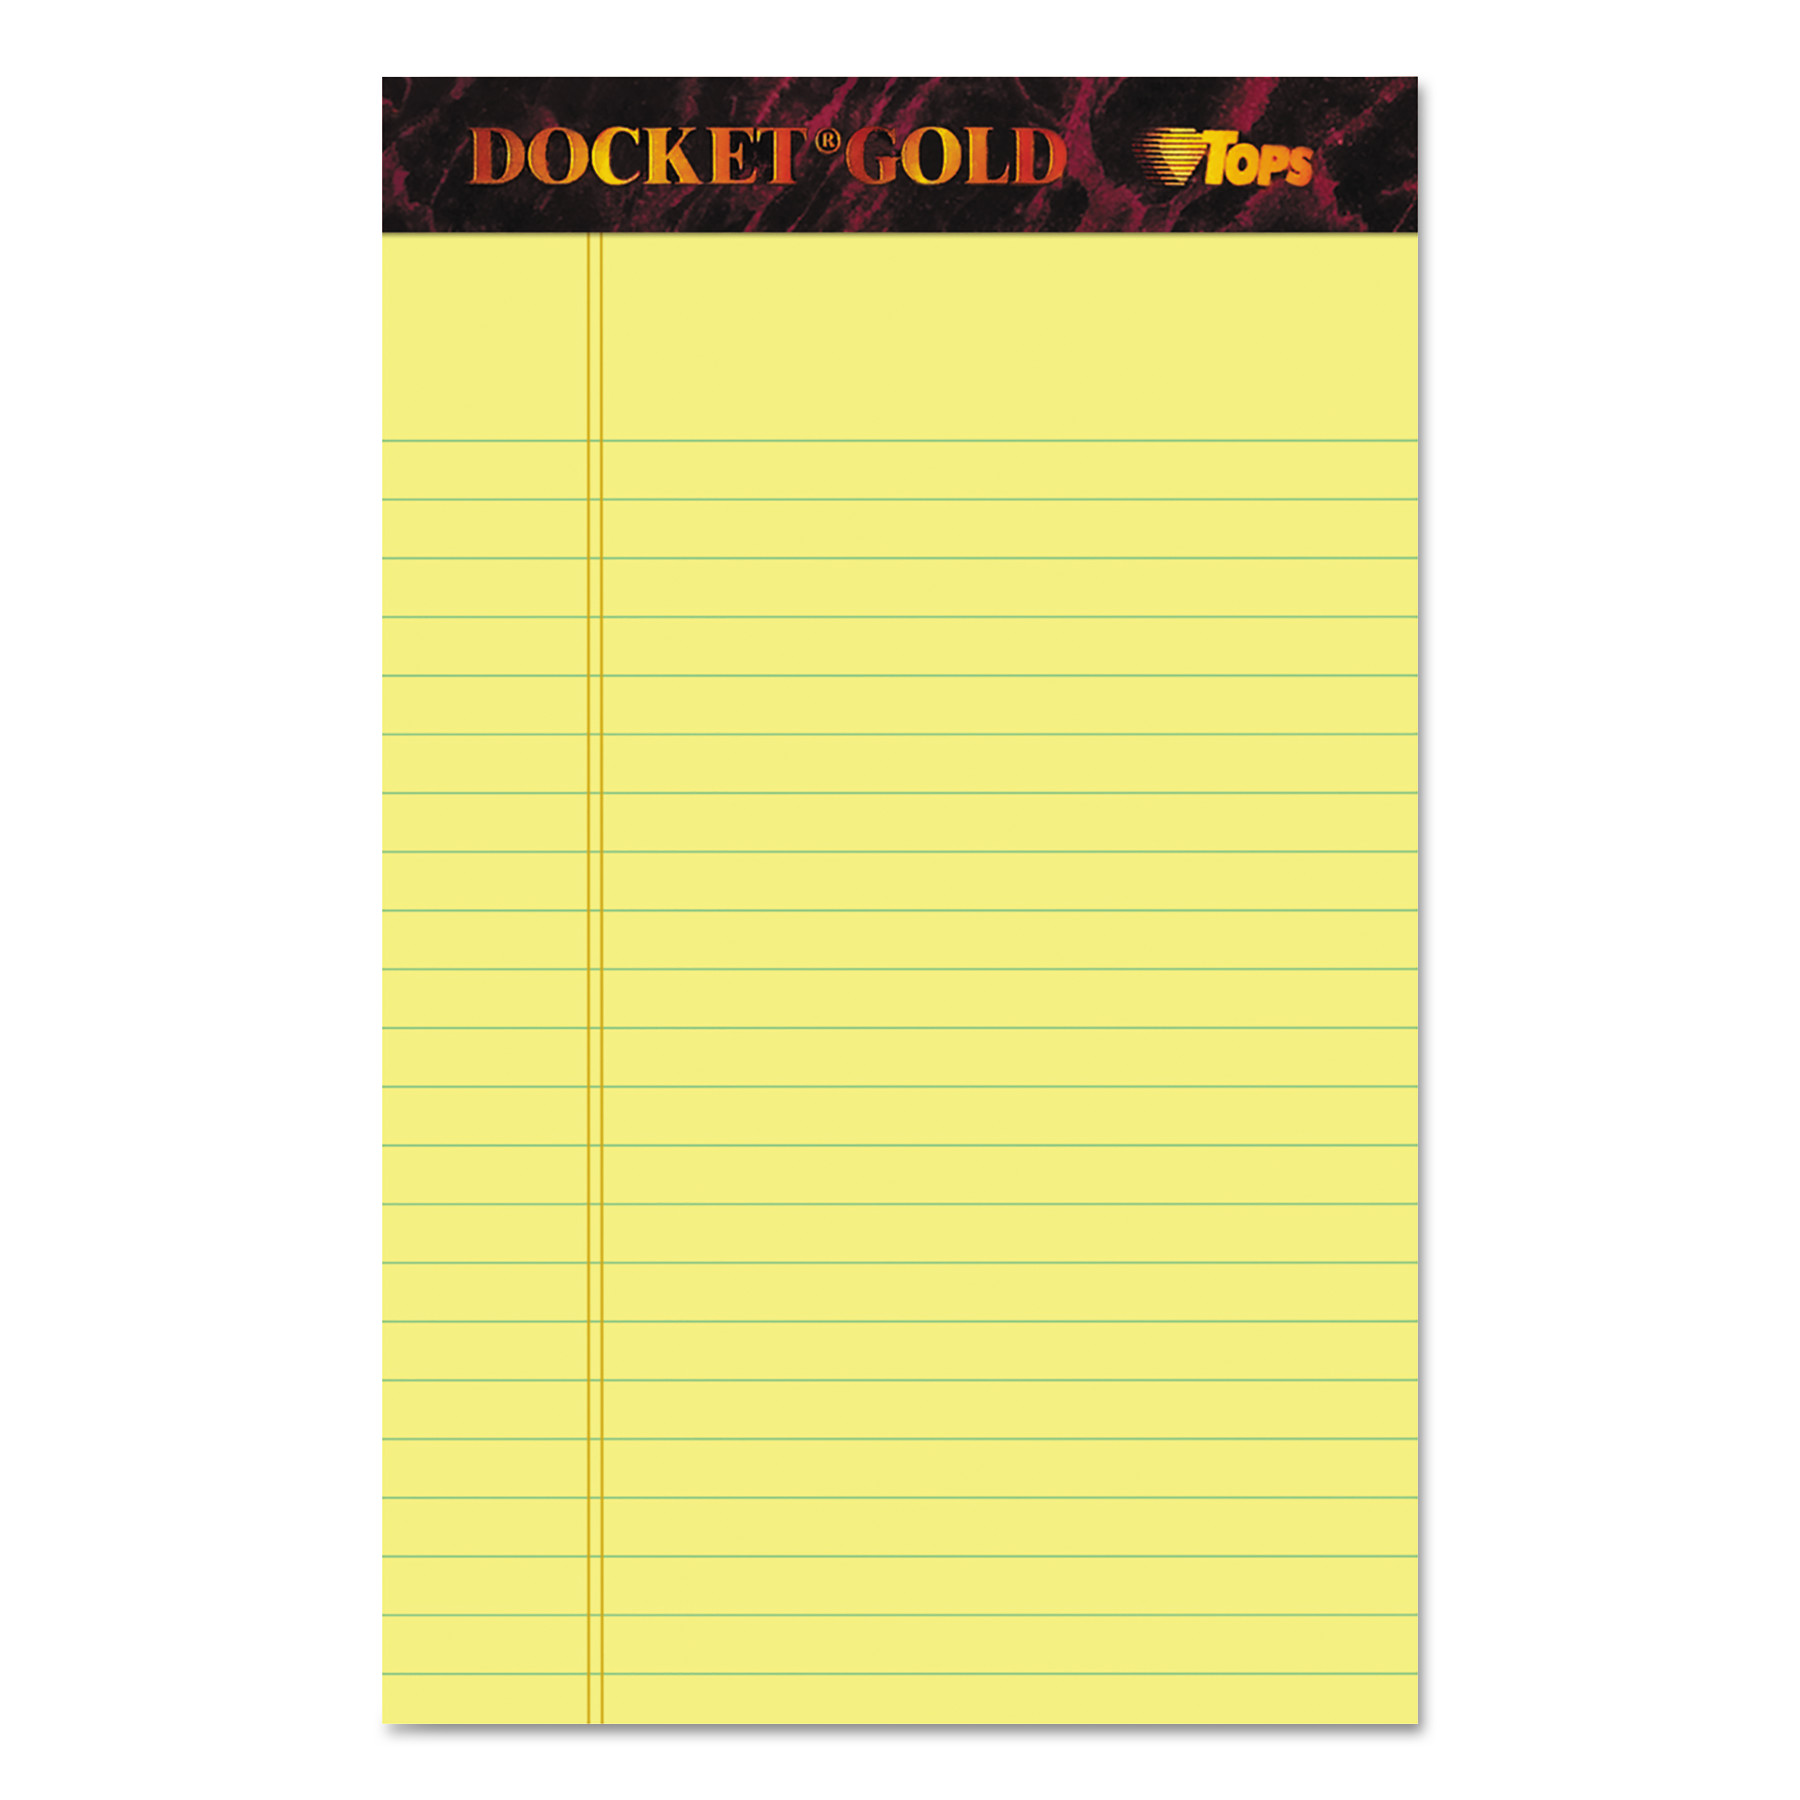  TOPS 63900 Docket Gold Ruled Perforated Pads, Narrow Rule, 5 x 8, Canary, 50 Sheets, 12/Pack (TOP63900) 